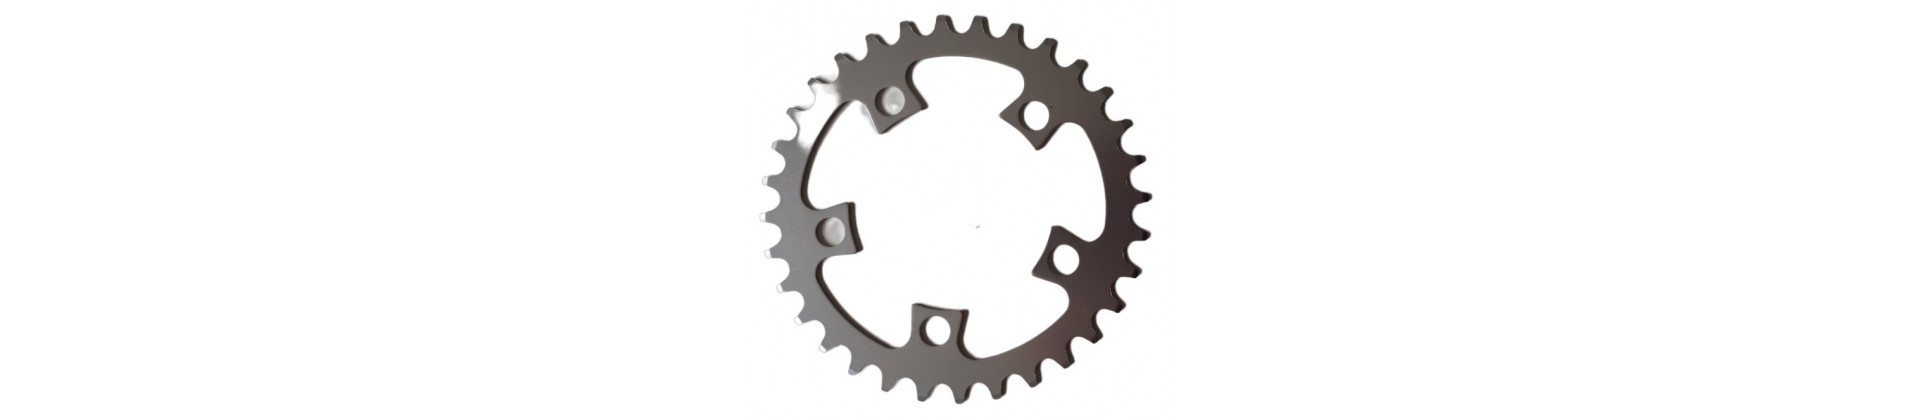 Chainring for city bike